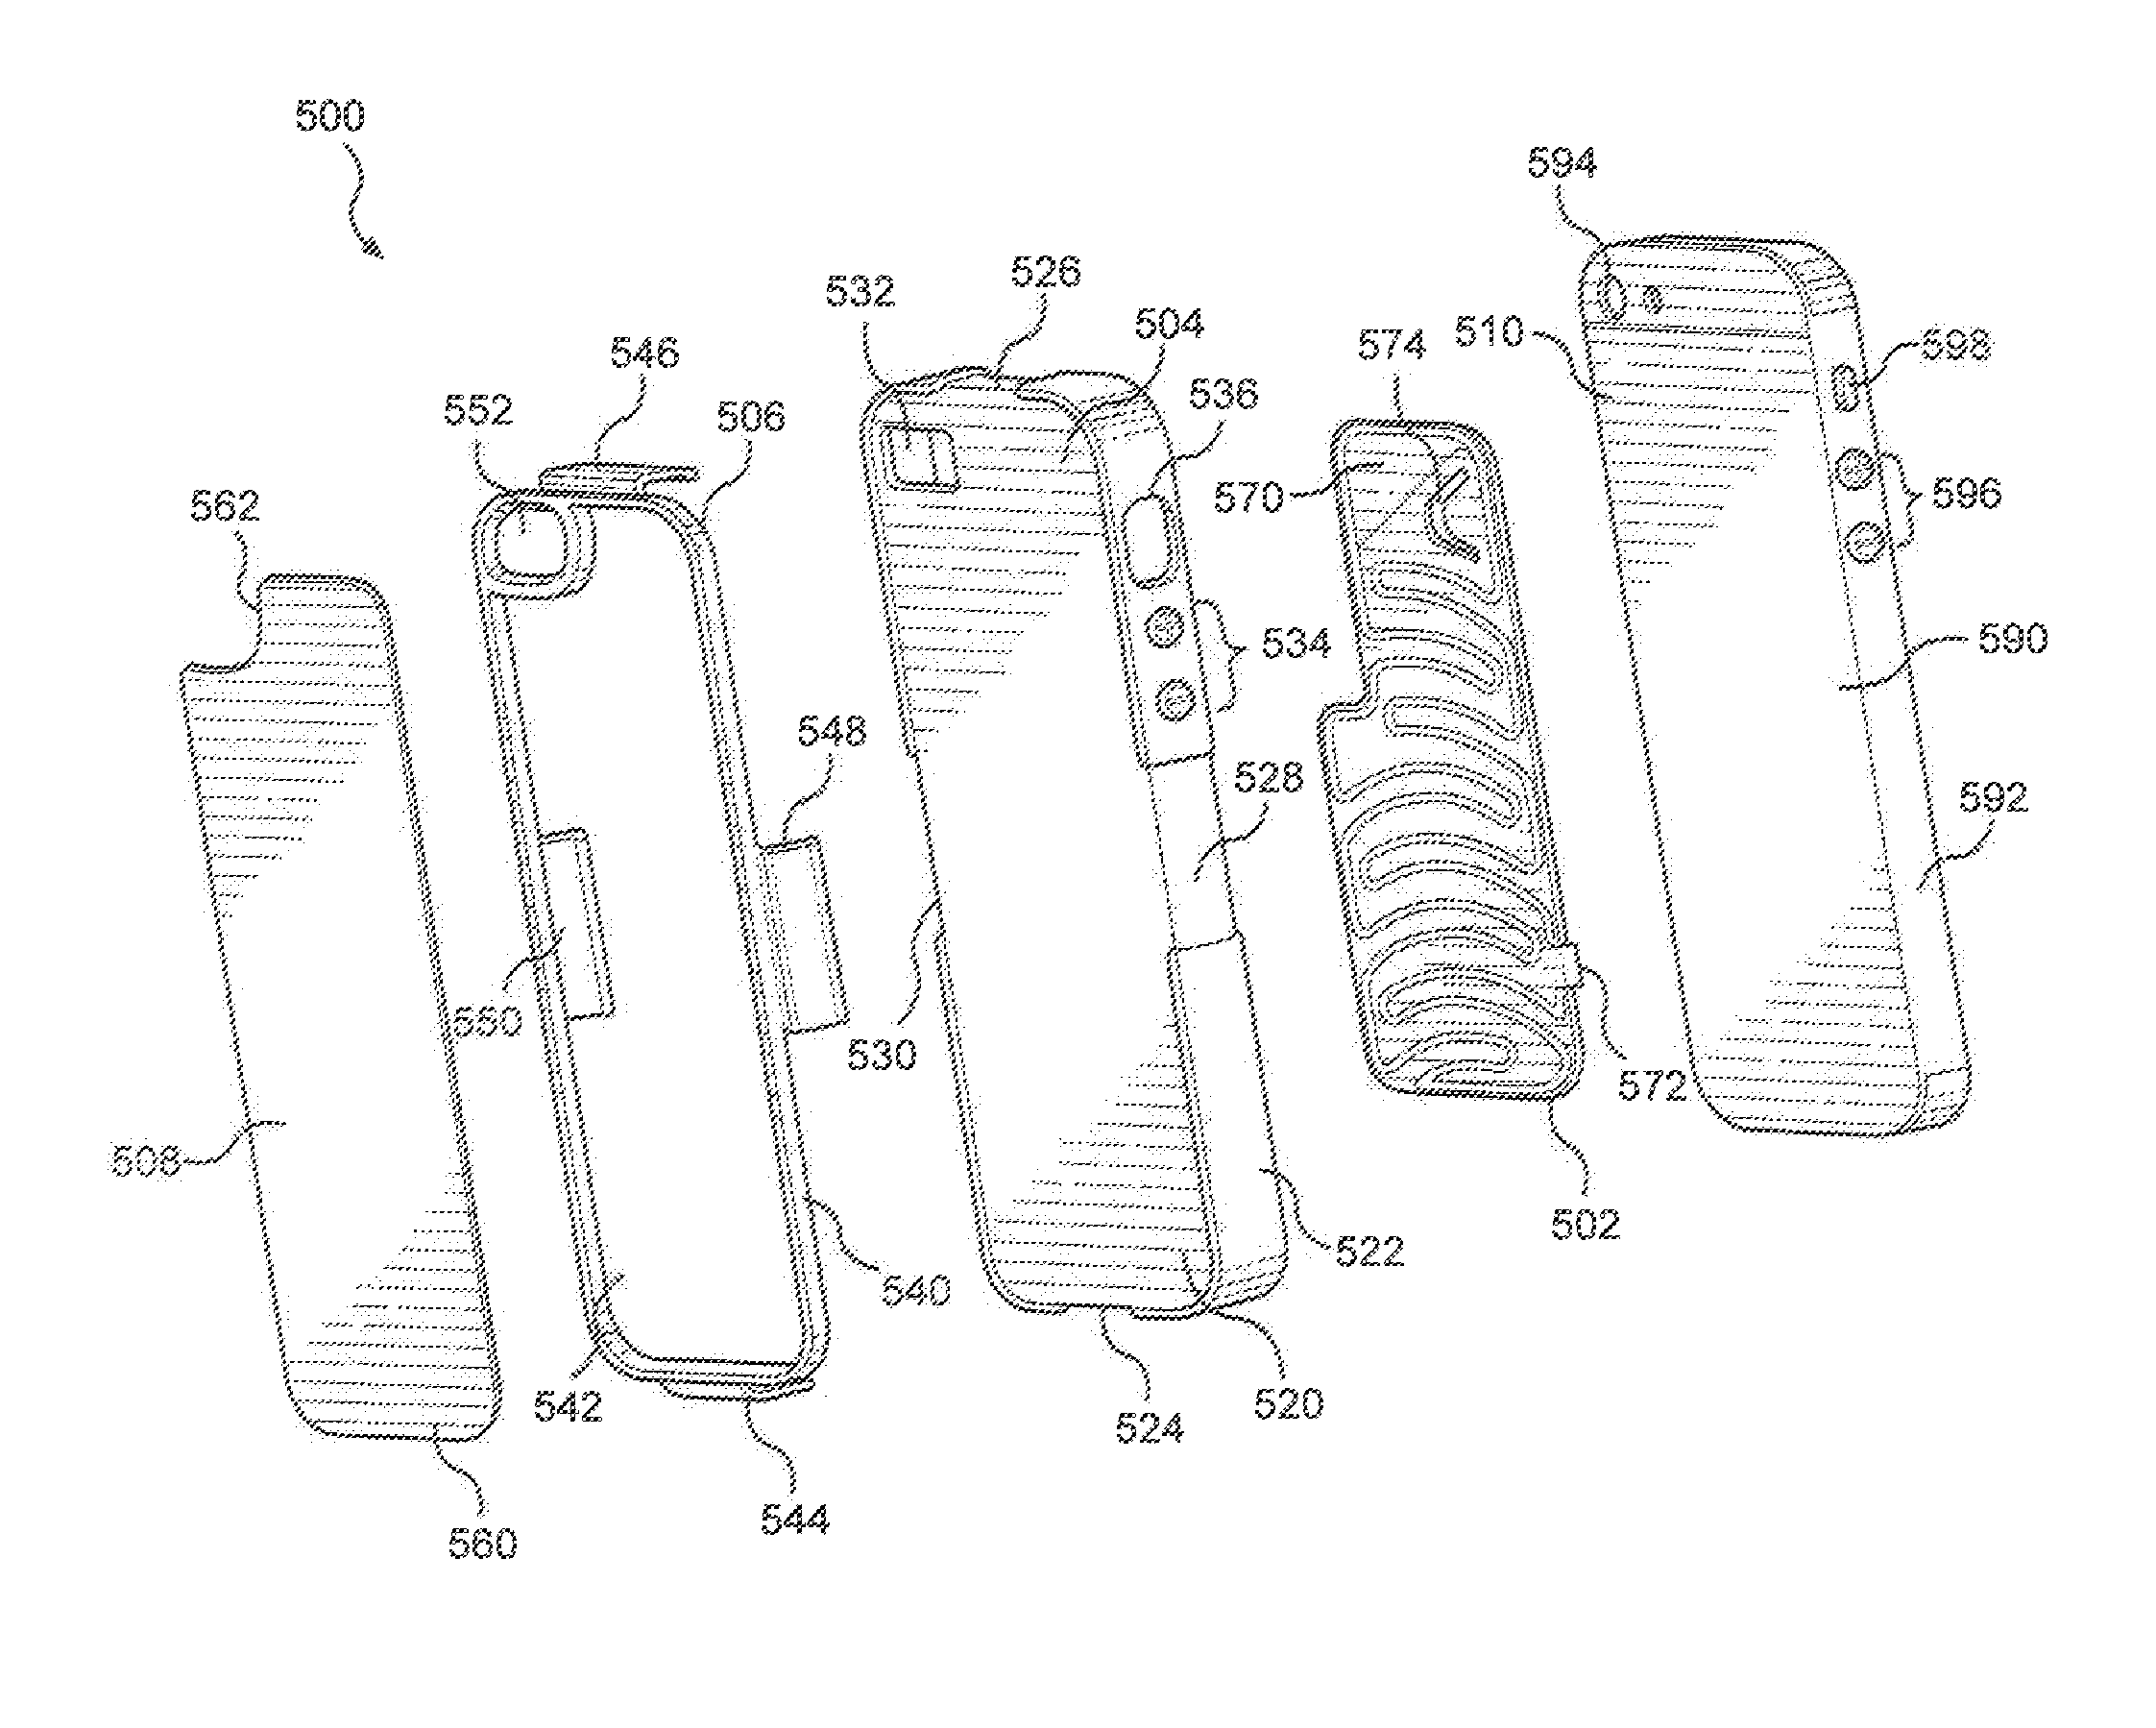 Radio frequency emission guard for portable wireless electronic device